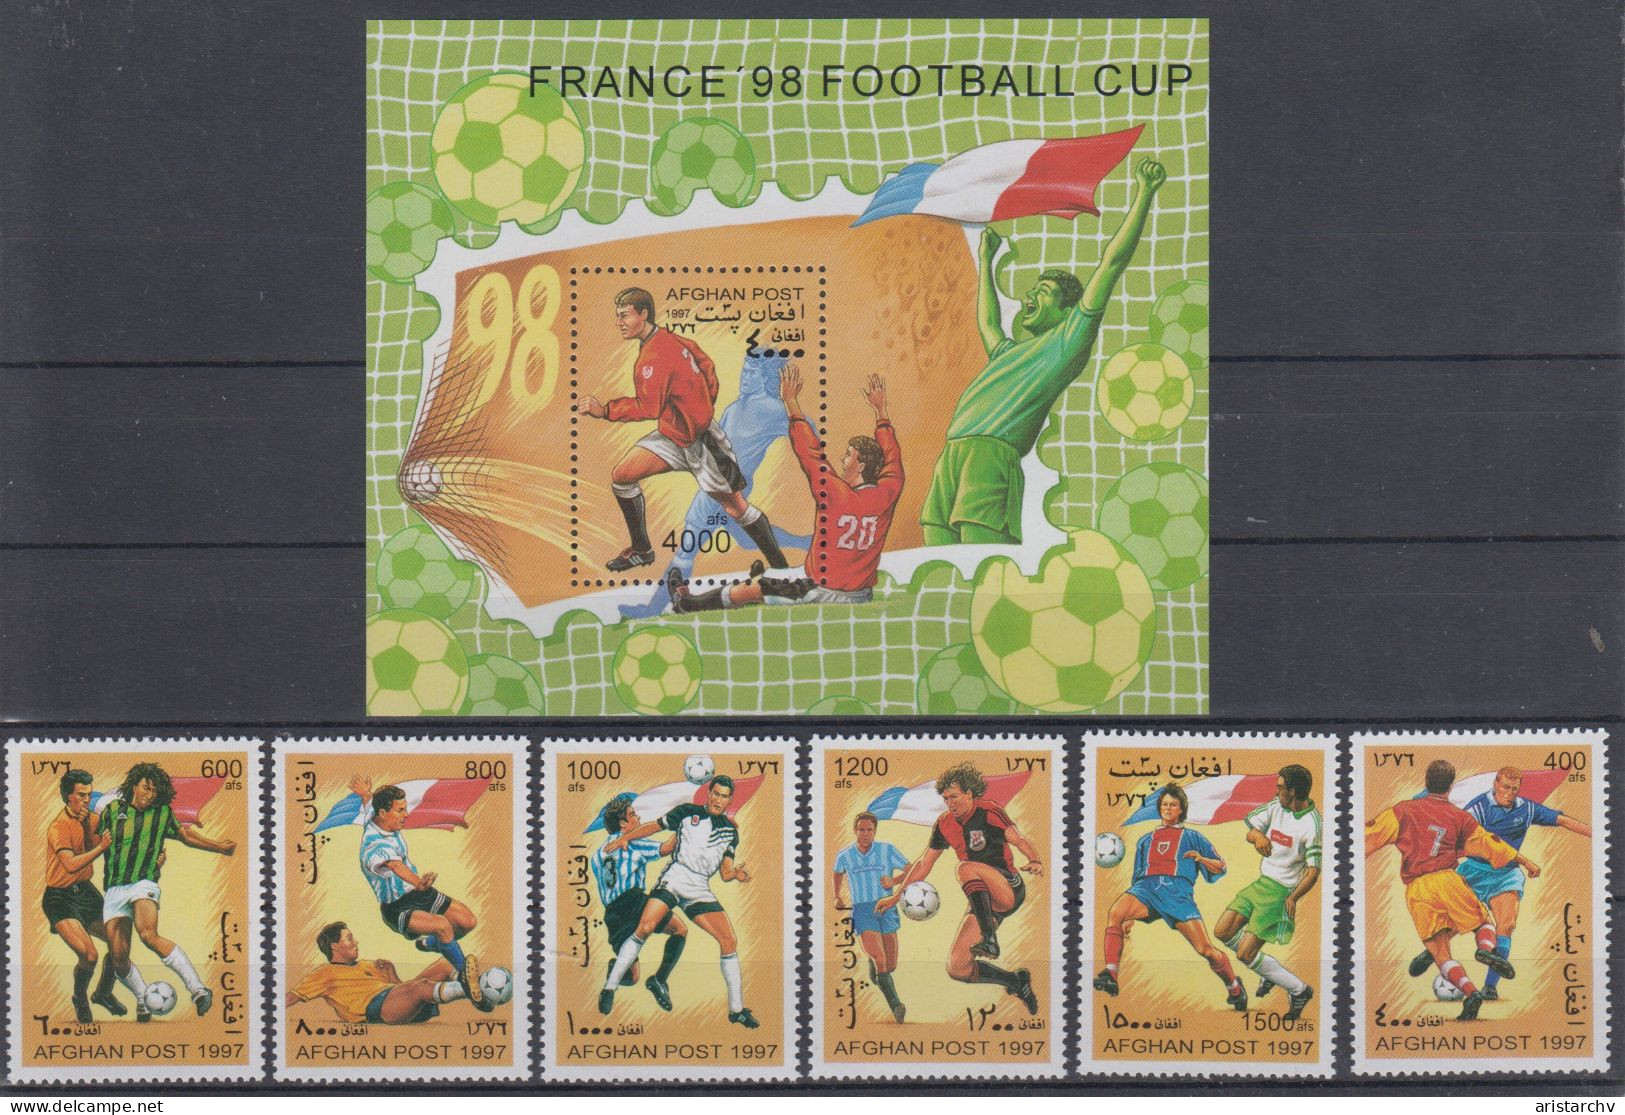 AFGHANISTAN 1998 FOOTBALL WORLD CUP S/SHEET AND 6 STAMPS - 1998 – France